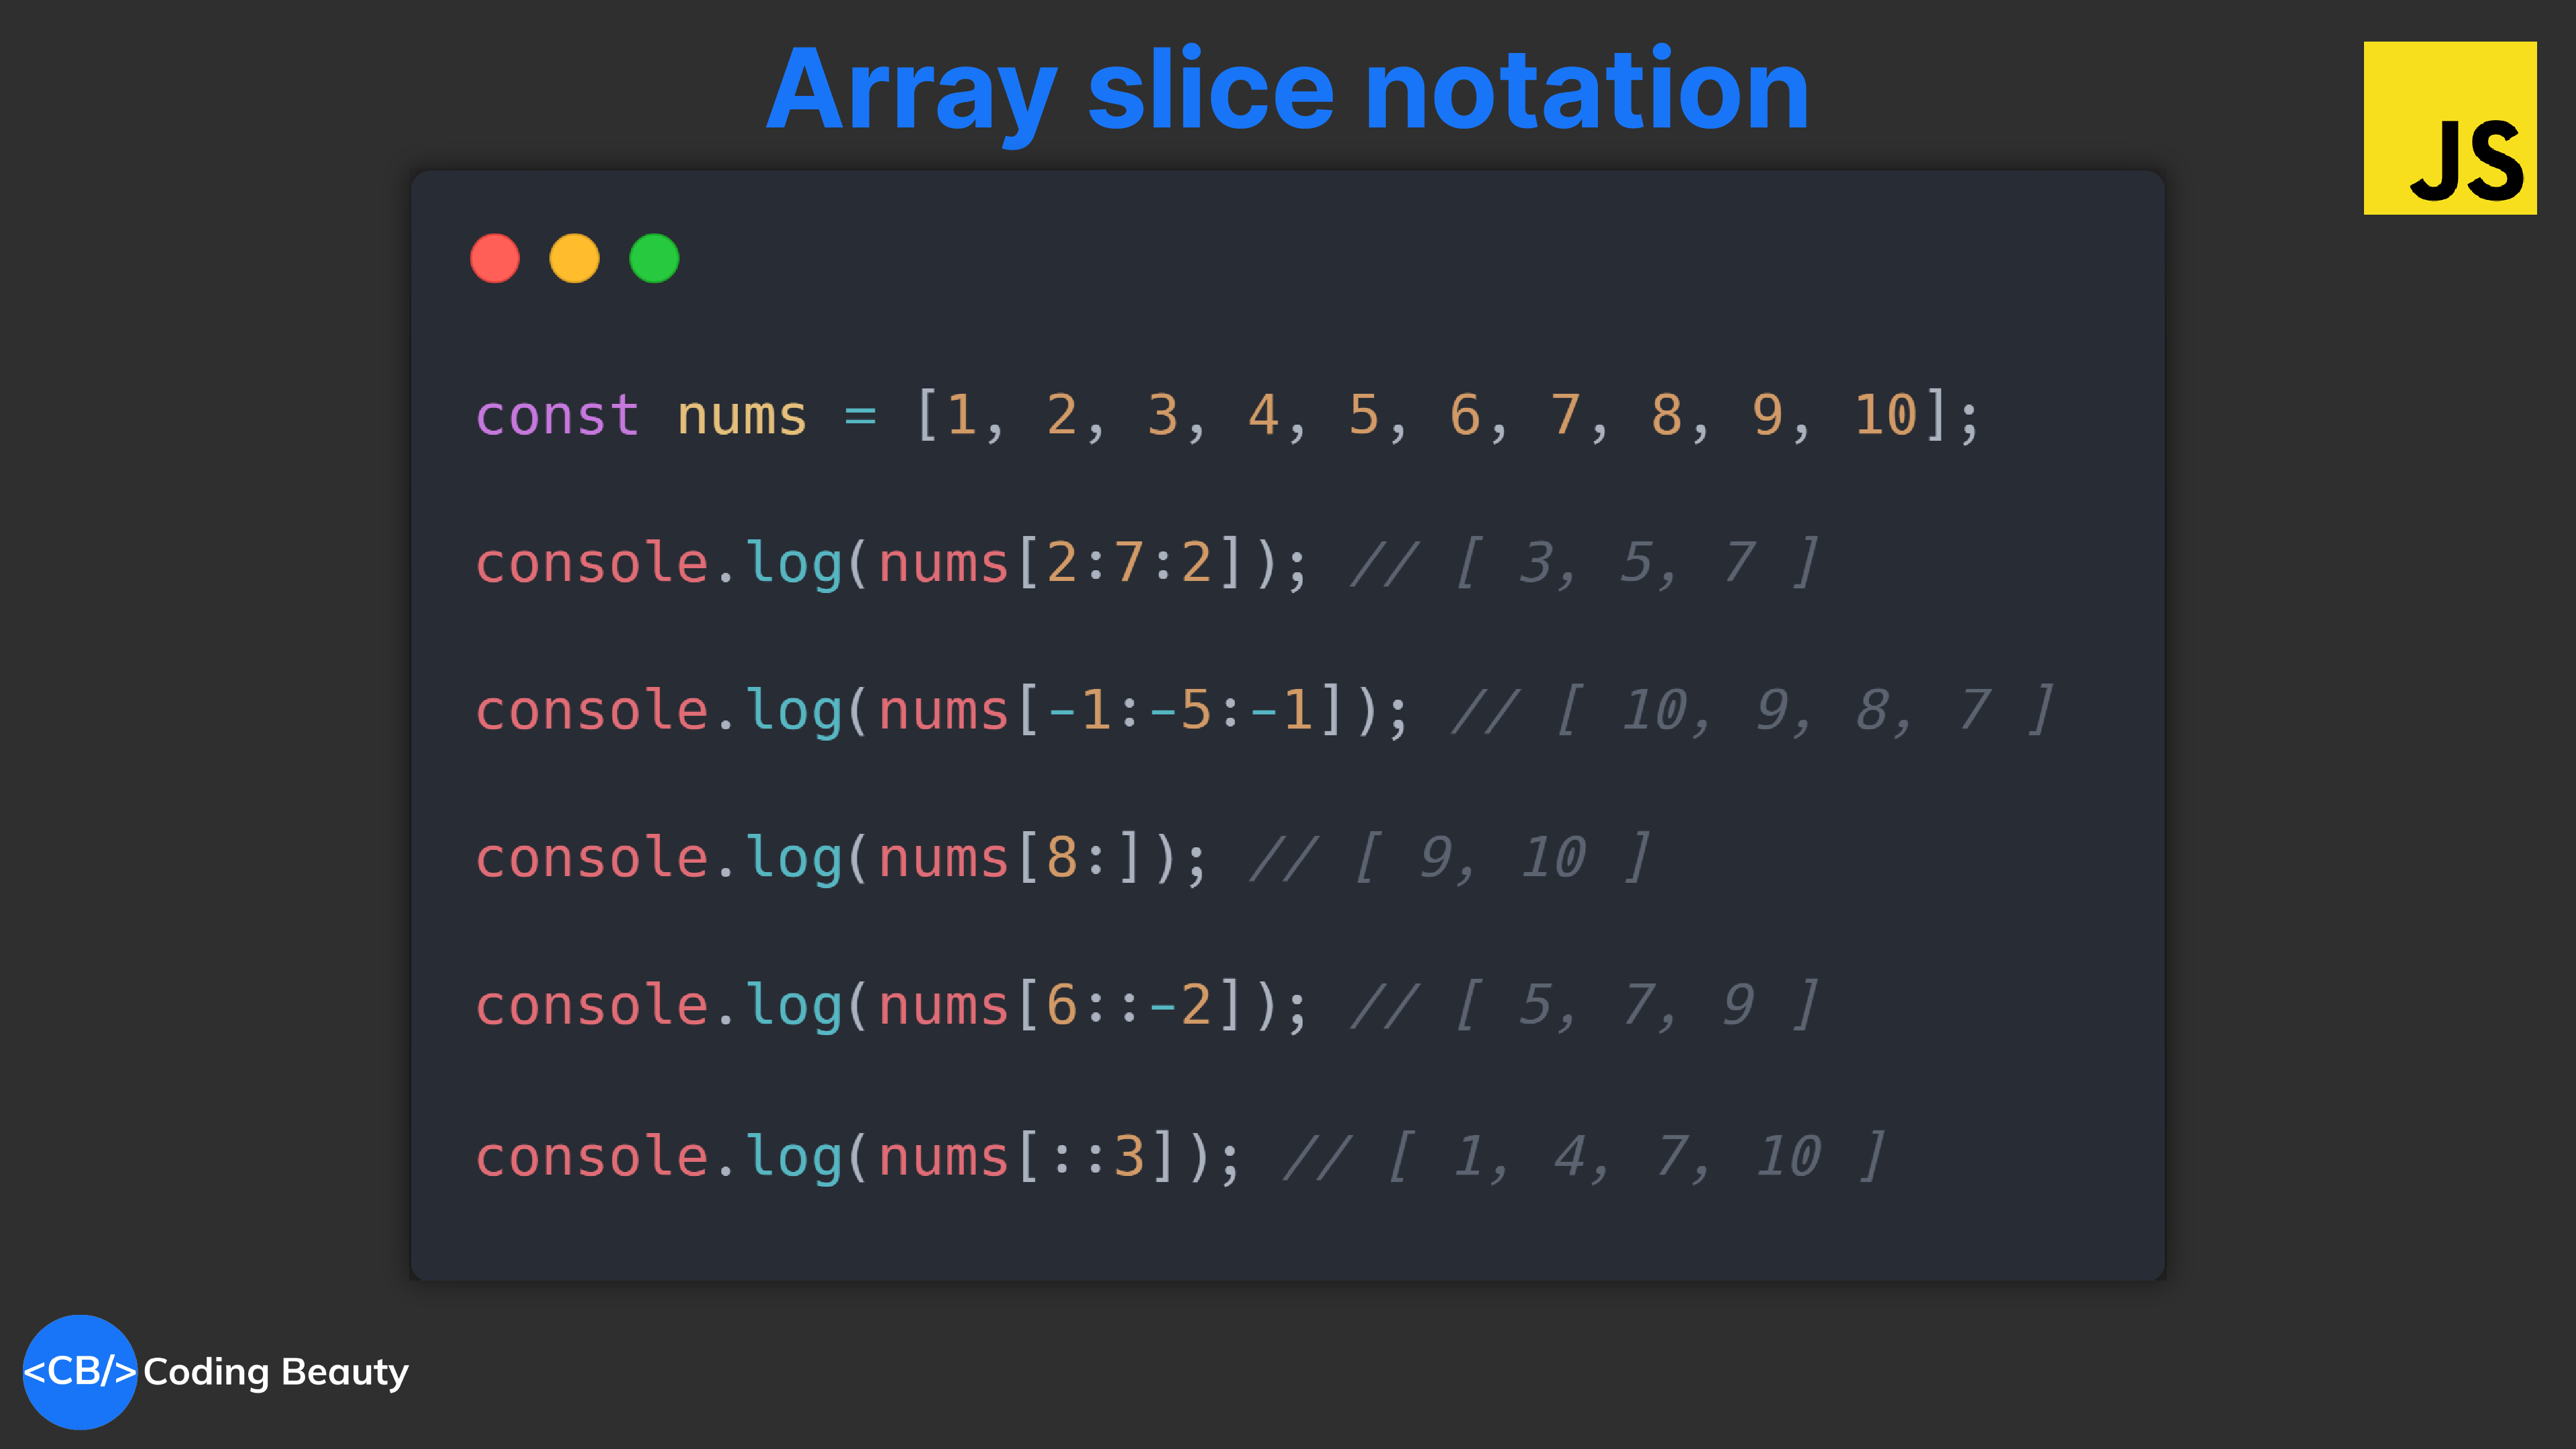 New array slice notation in JavaScript - array[start:stop:step]